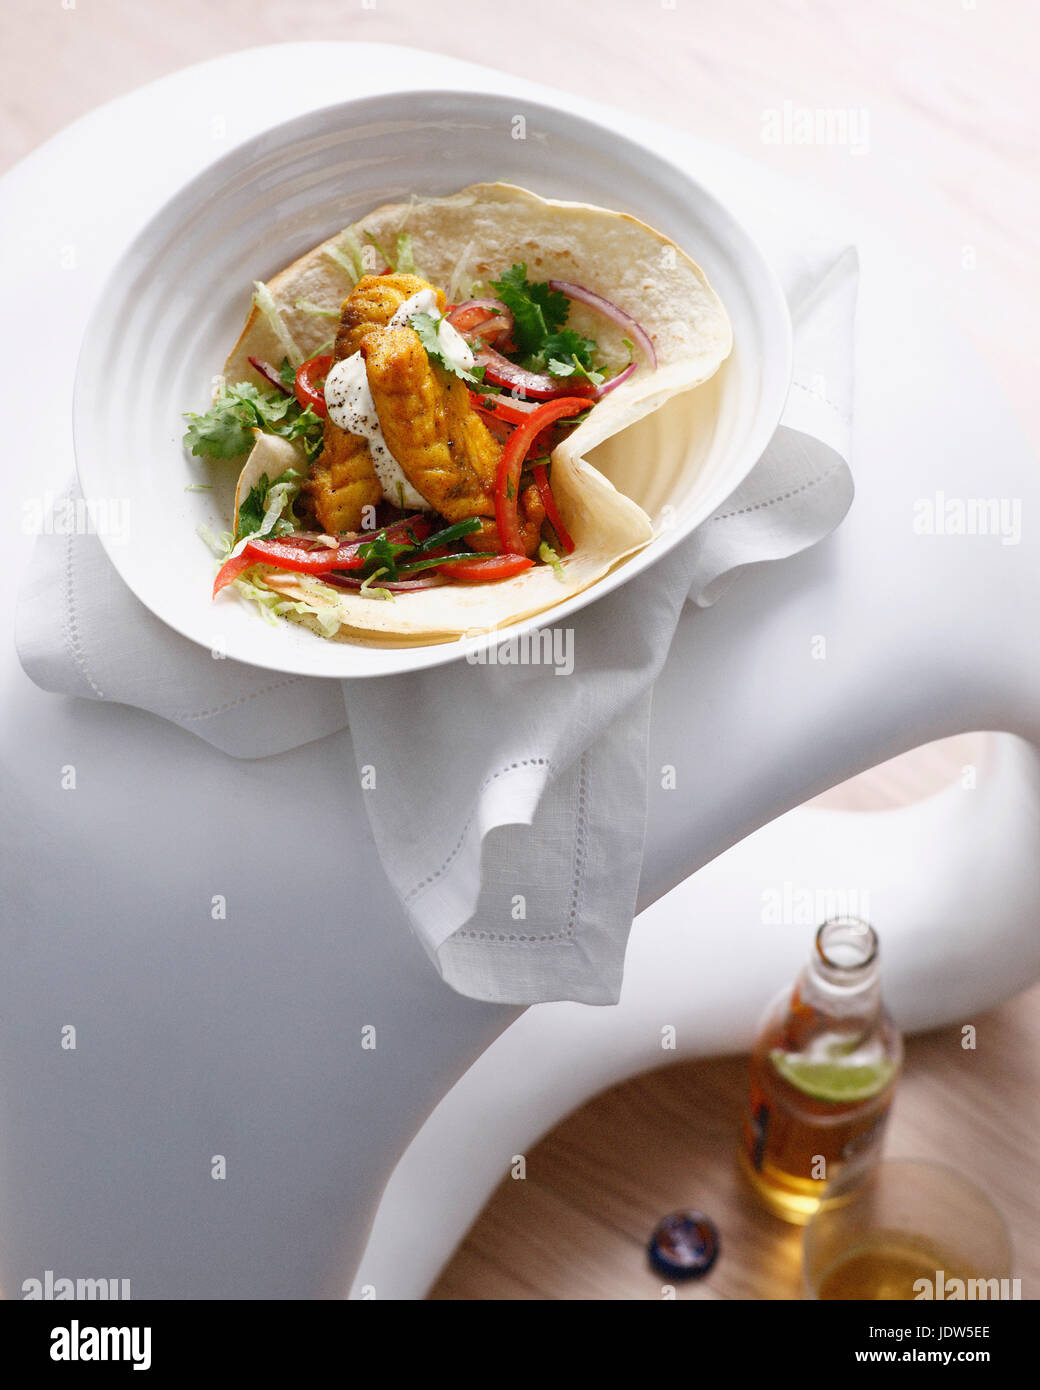 Fish taco with bottle of beer Stock Photo